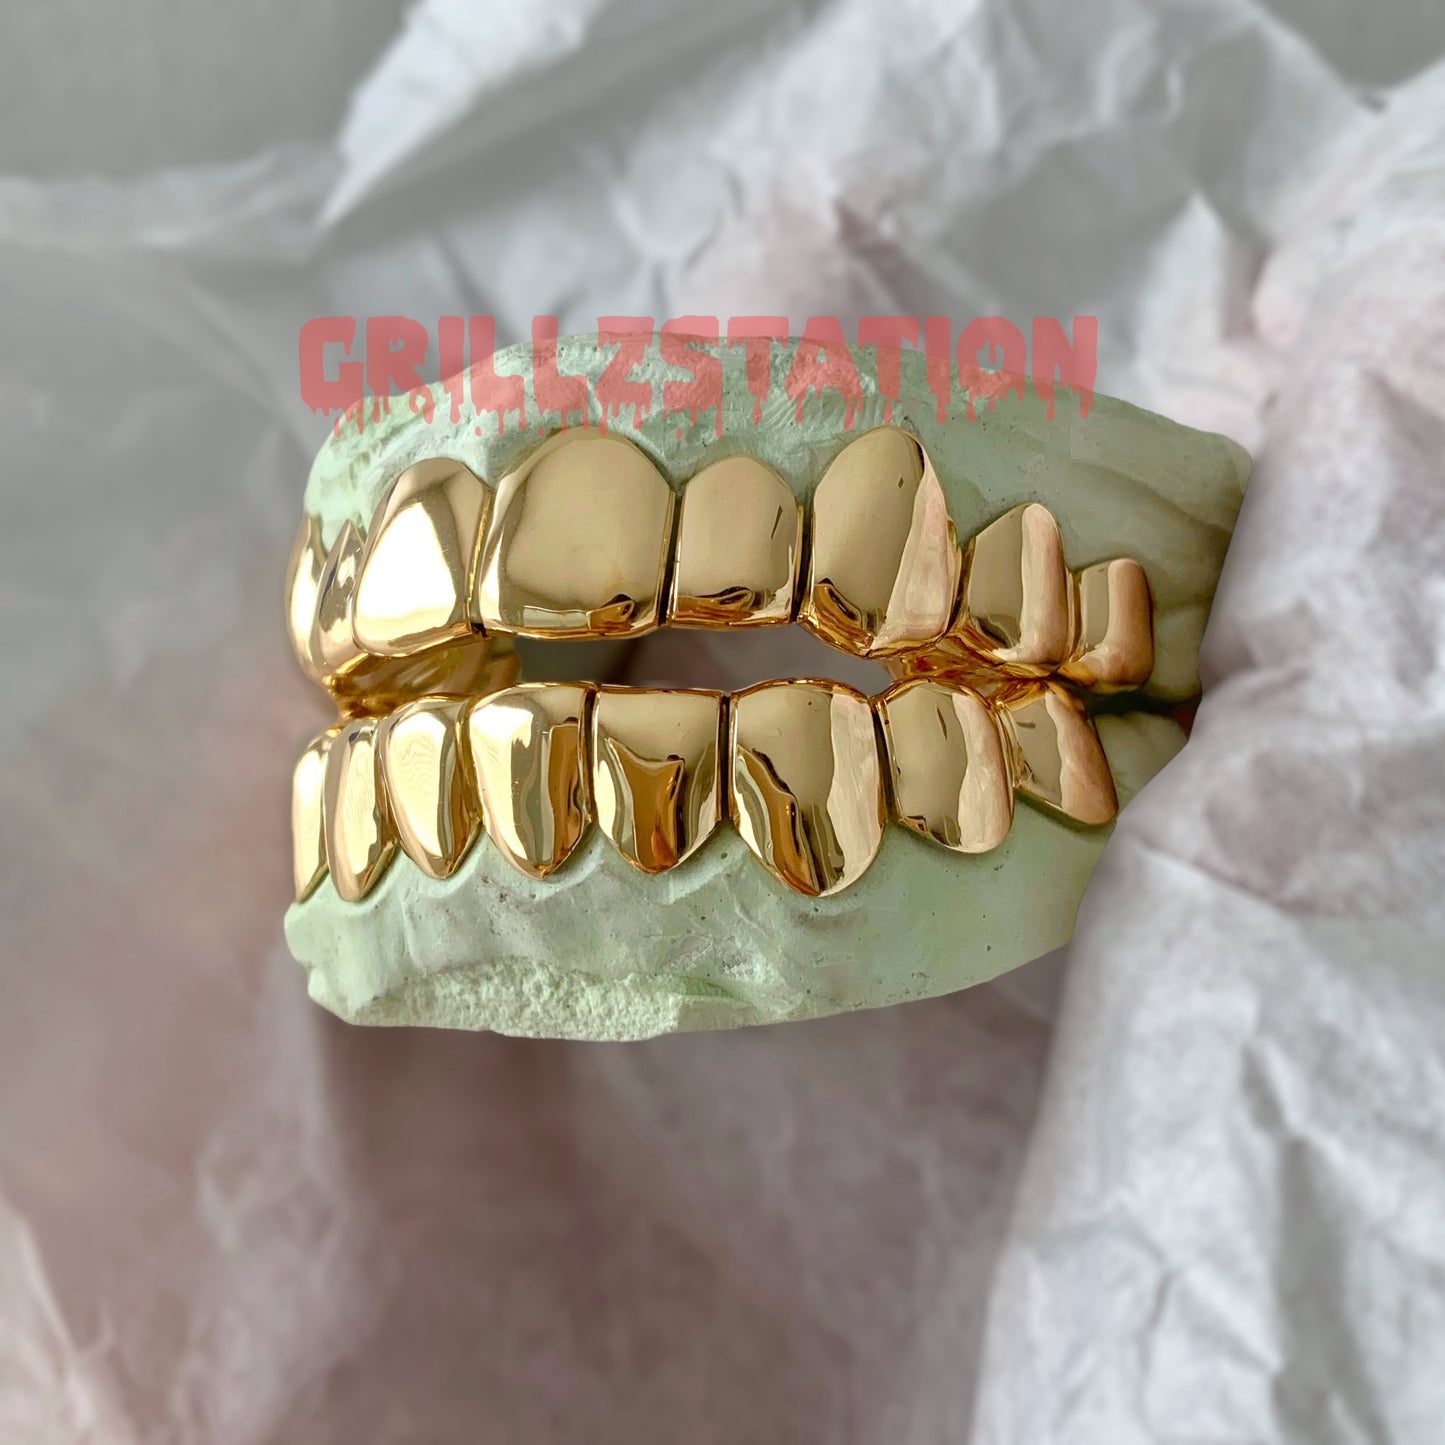 THICK Florida Permanent cut grillz / 925 Silver & 10K - 18K Real Solid gold - GRILLZSTATION 